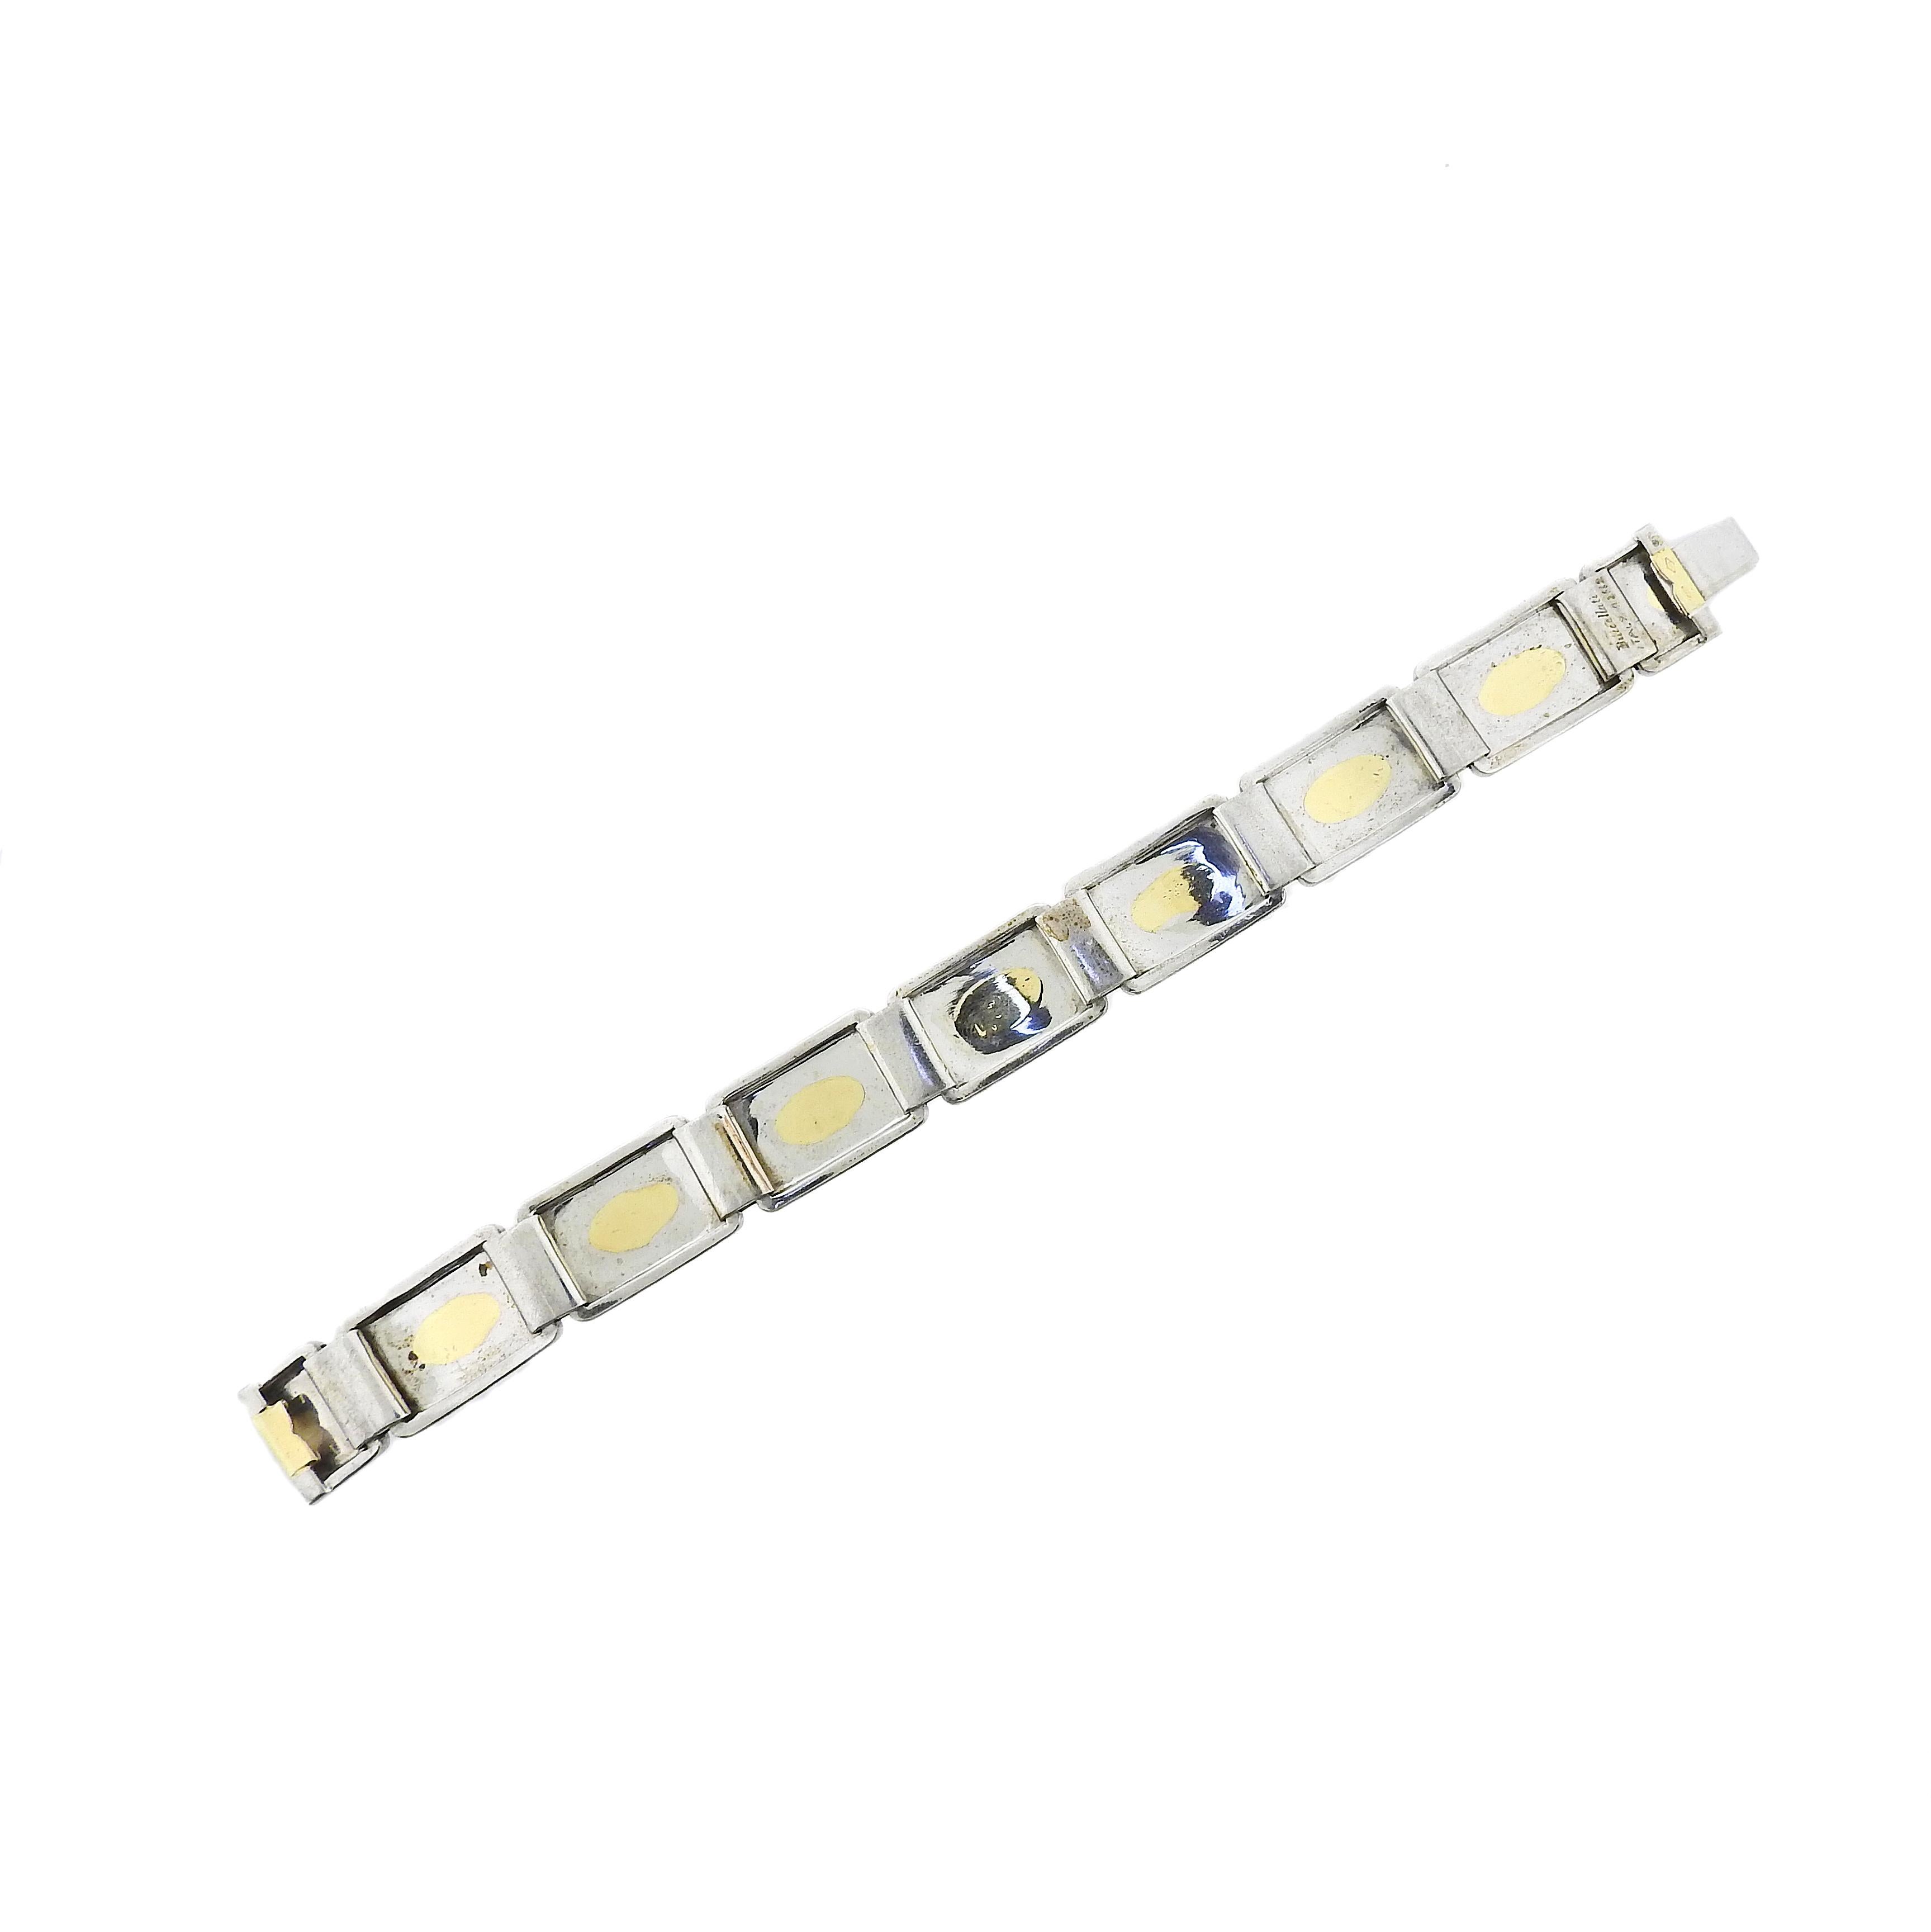 Buccellati 18k gold and silver Geminato bracelet, comes with original receipt from Gump's from 1999. Bracelet is 7